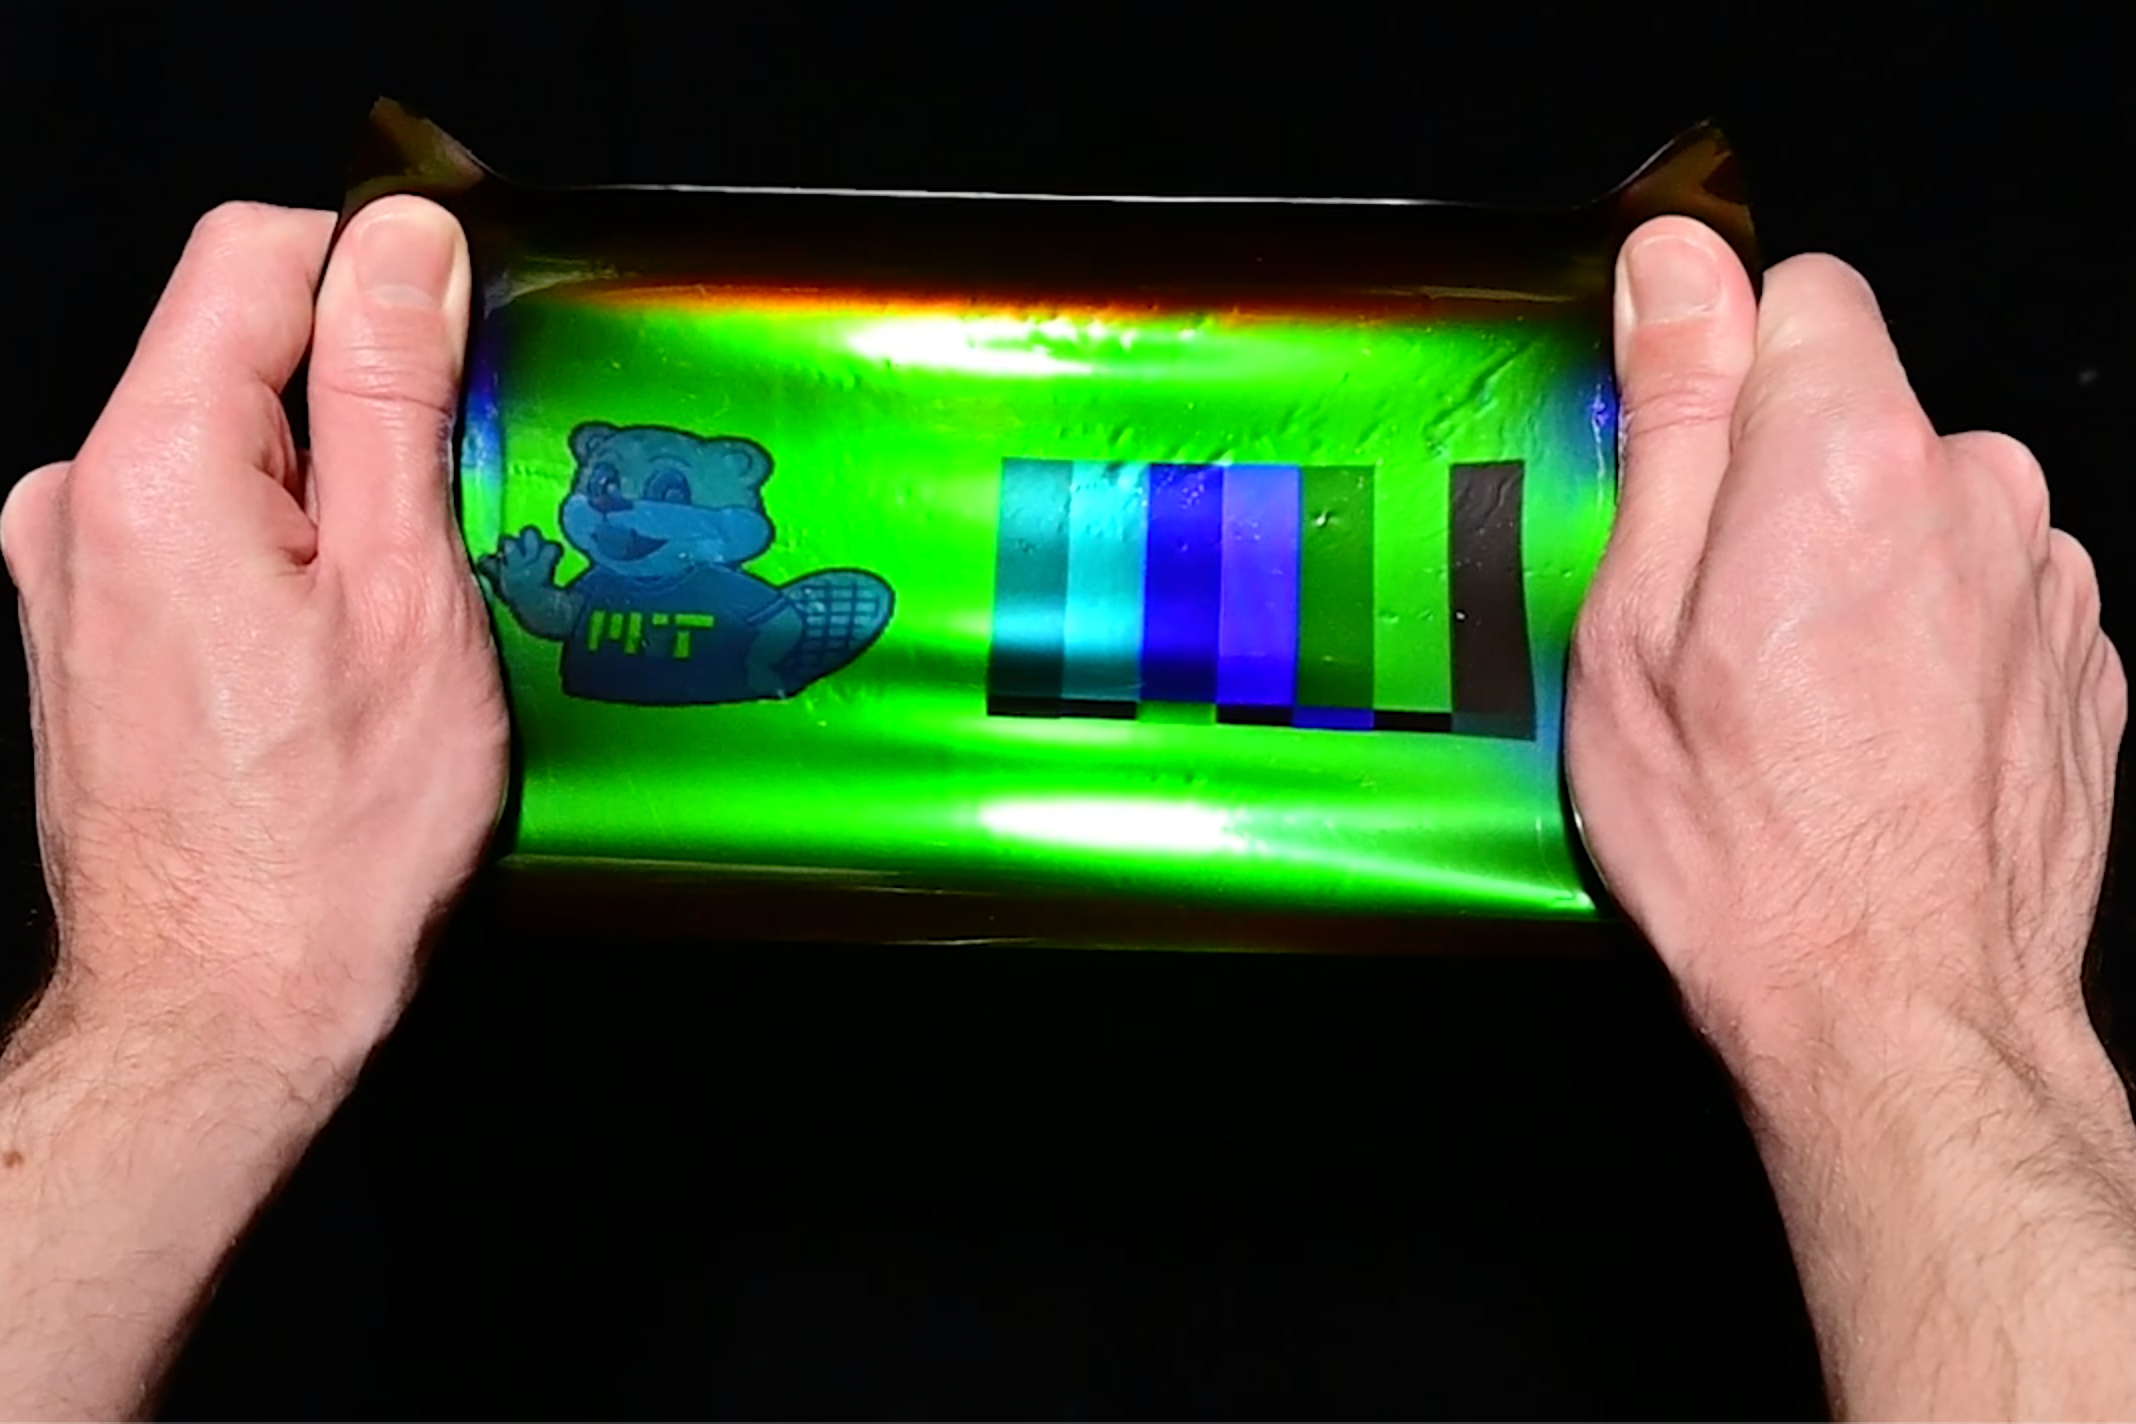 Engineers repurpose 19th-century photography technique to make stretchy,  color-changing films, MIT News